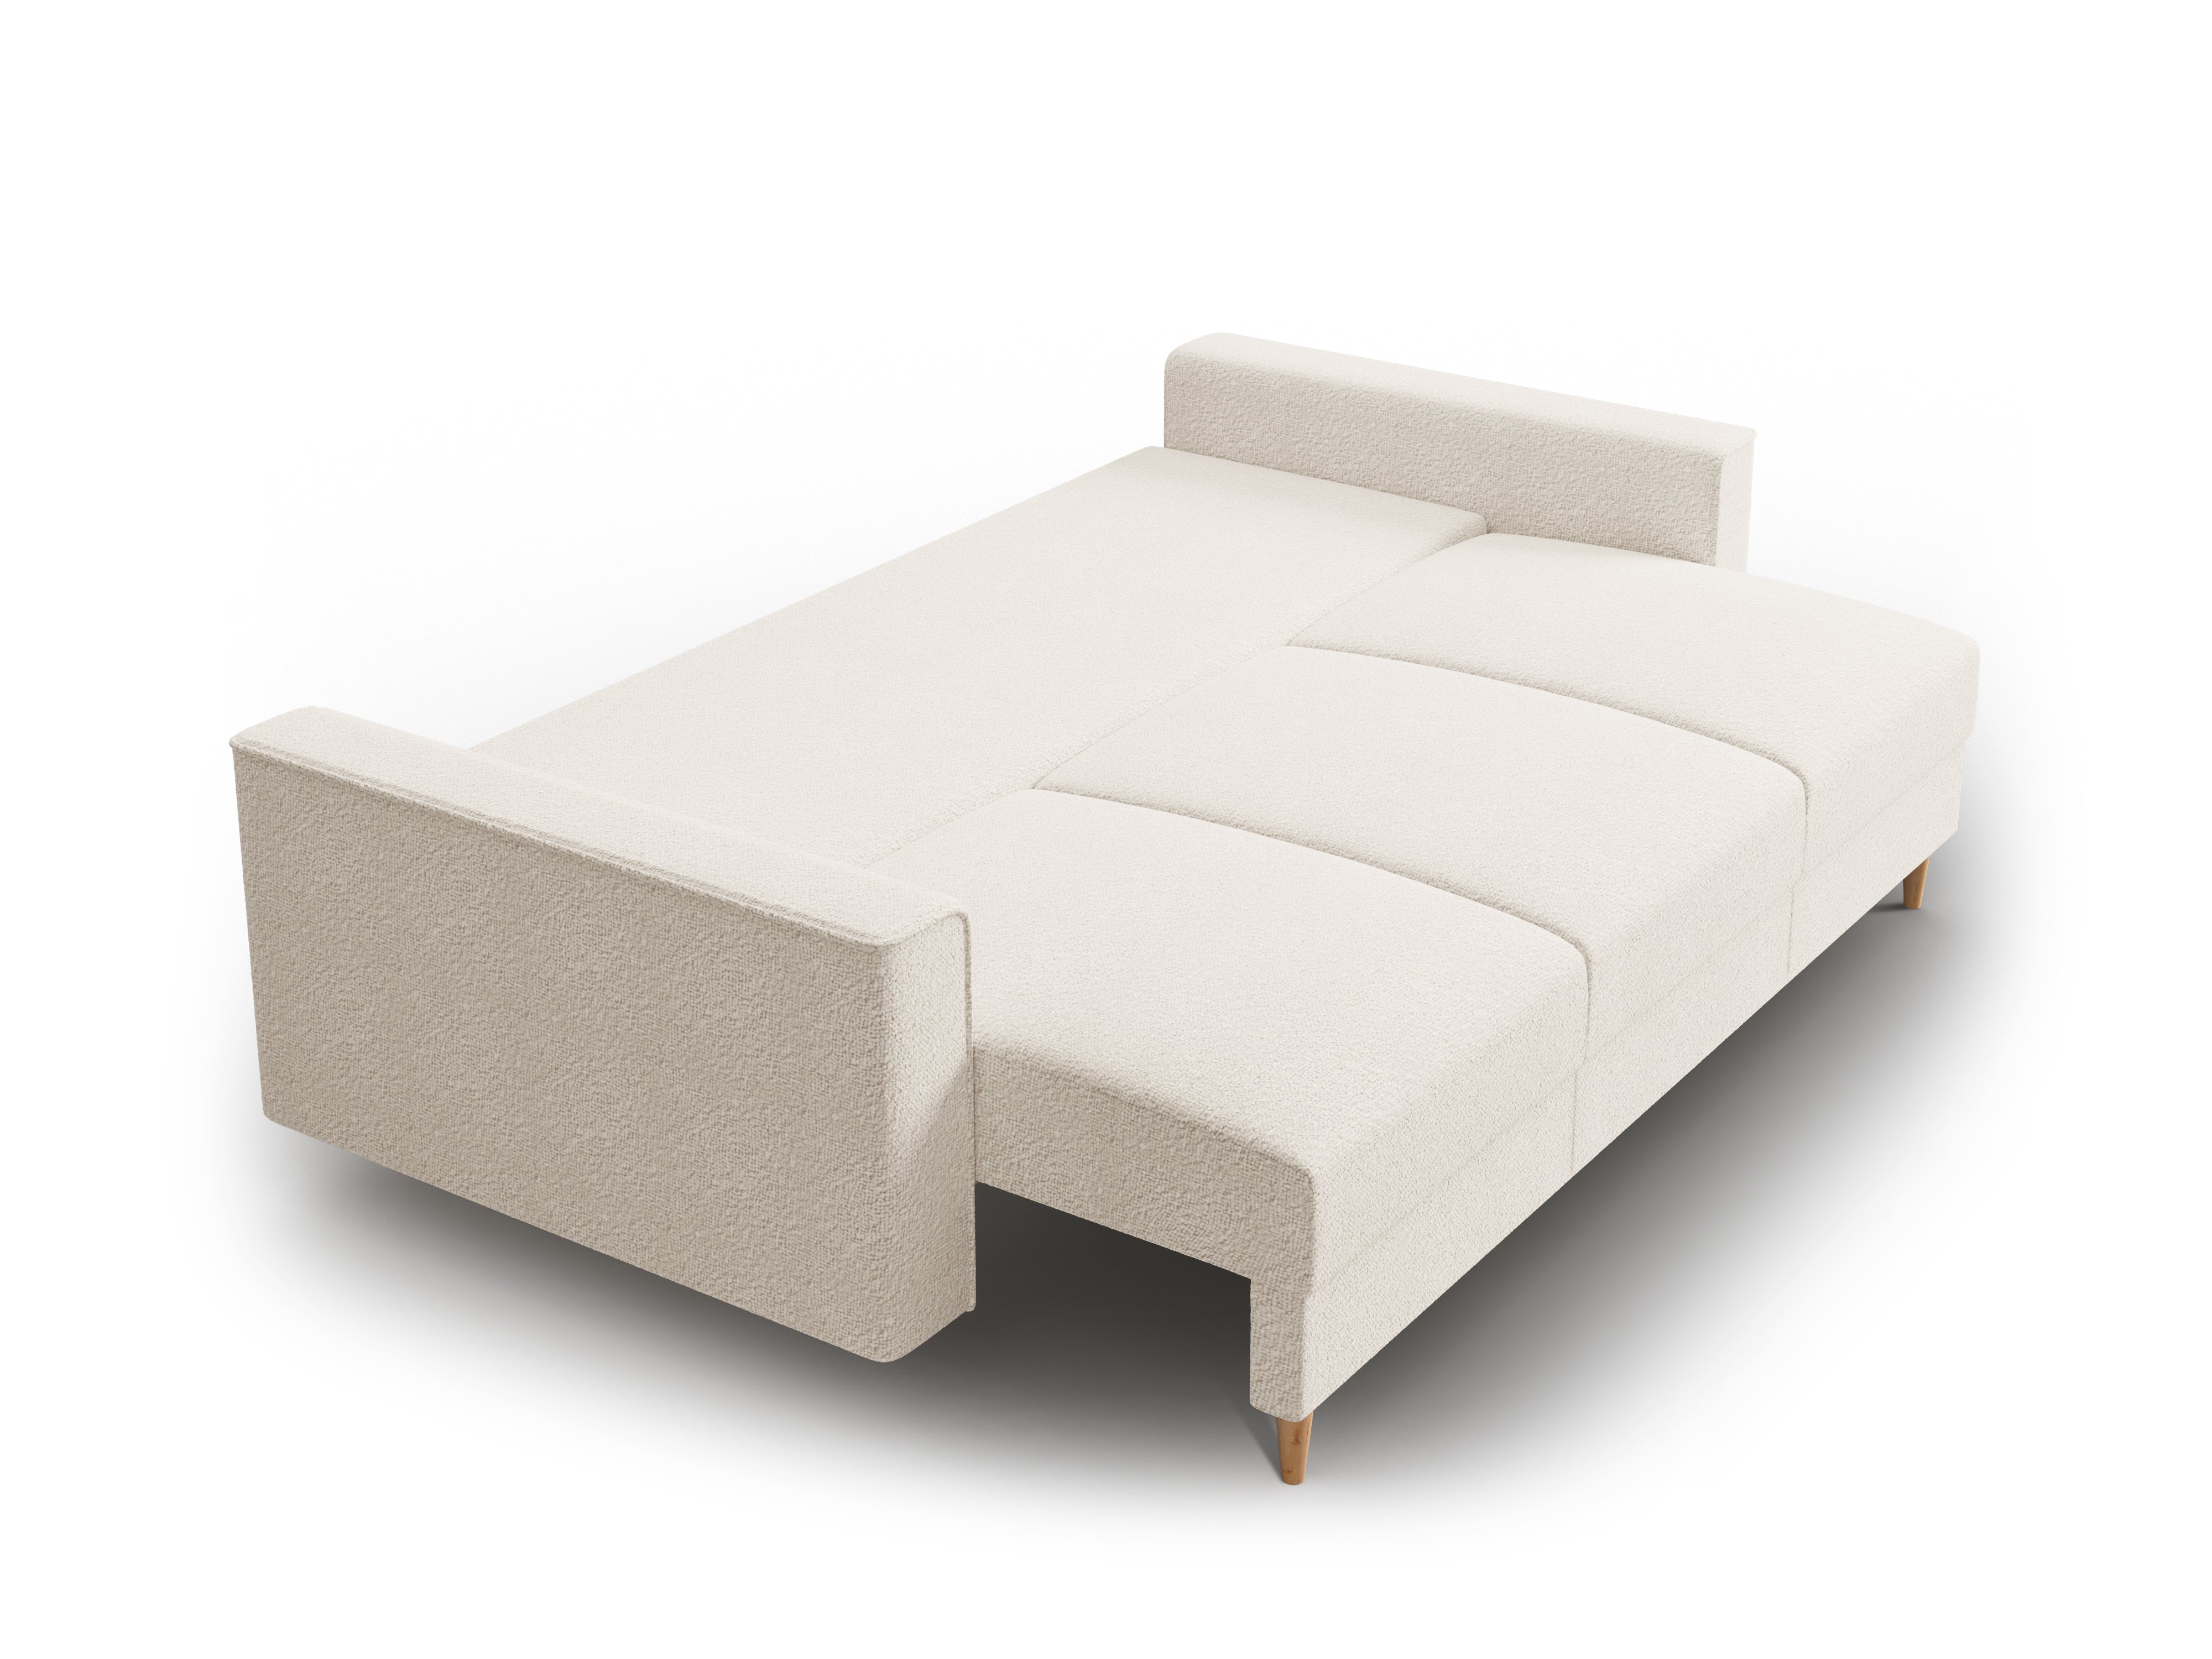 Boucle Sofa With Bed Function And Box, "Cartadera", 3 Seats, 222x100x92
Made in Europe, Mazzini Sofas, Eye on Design